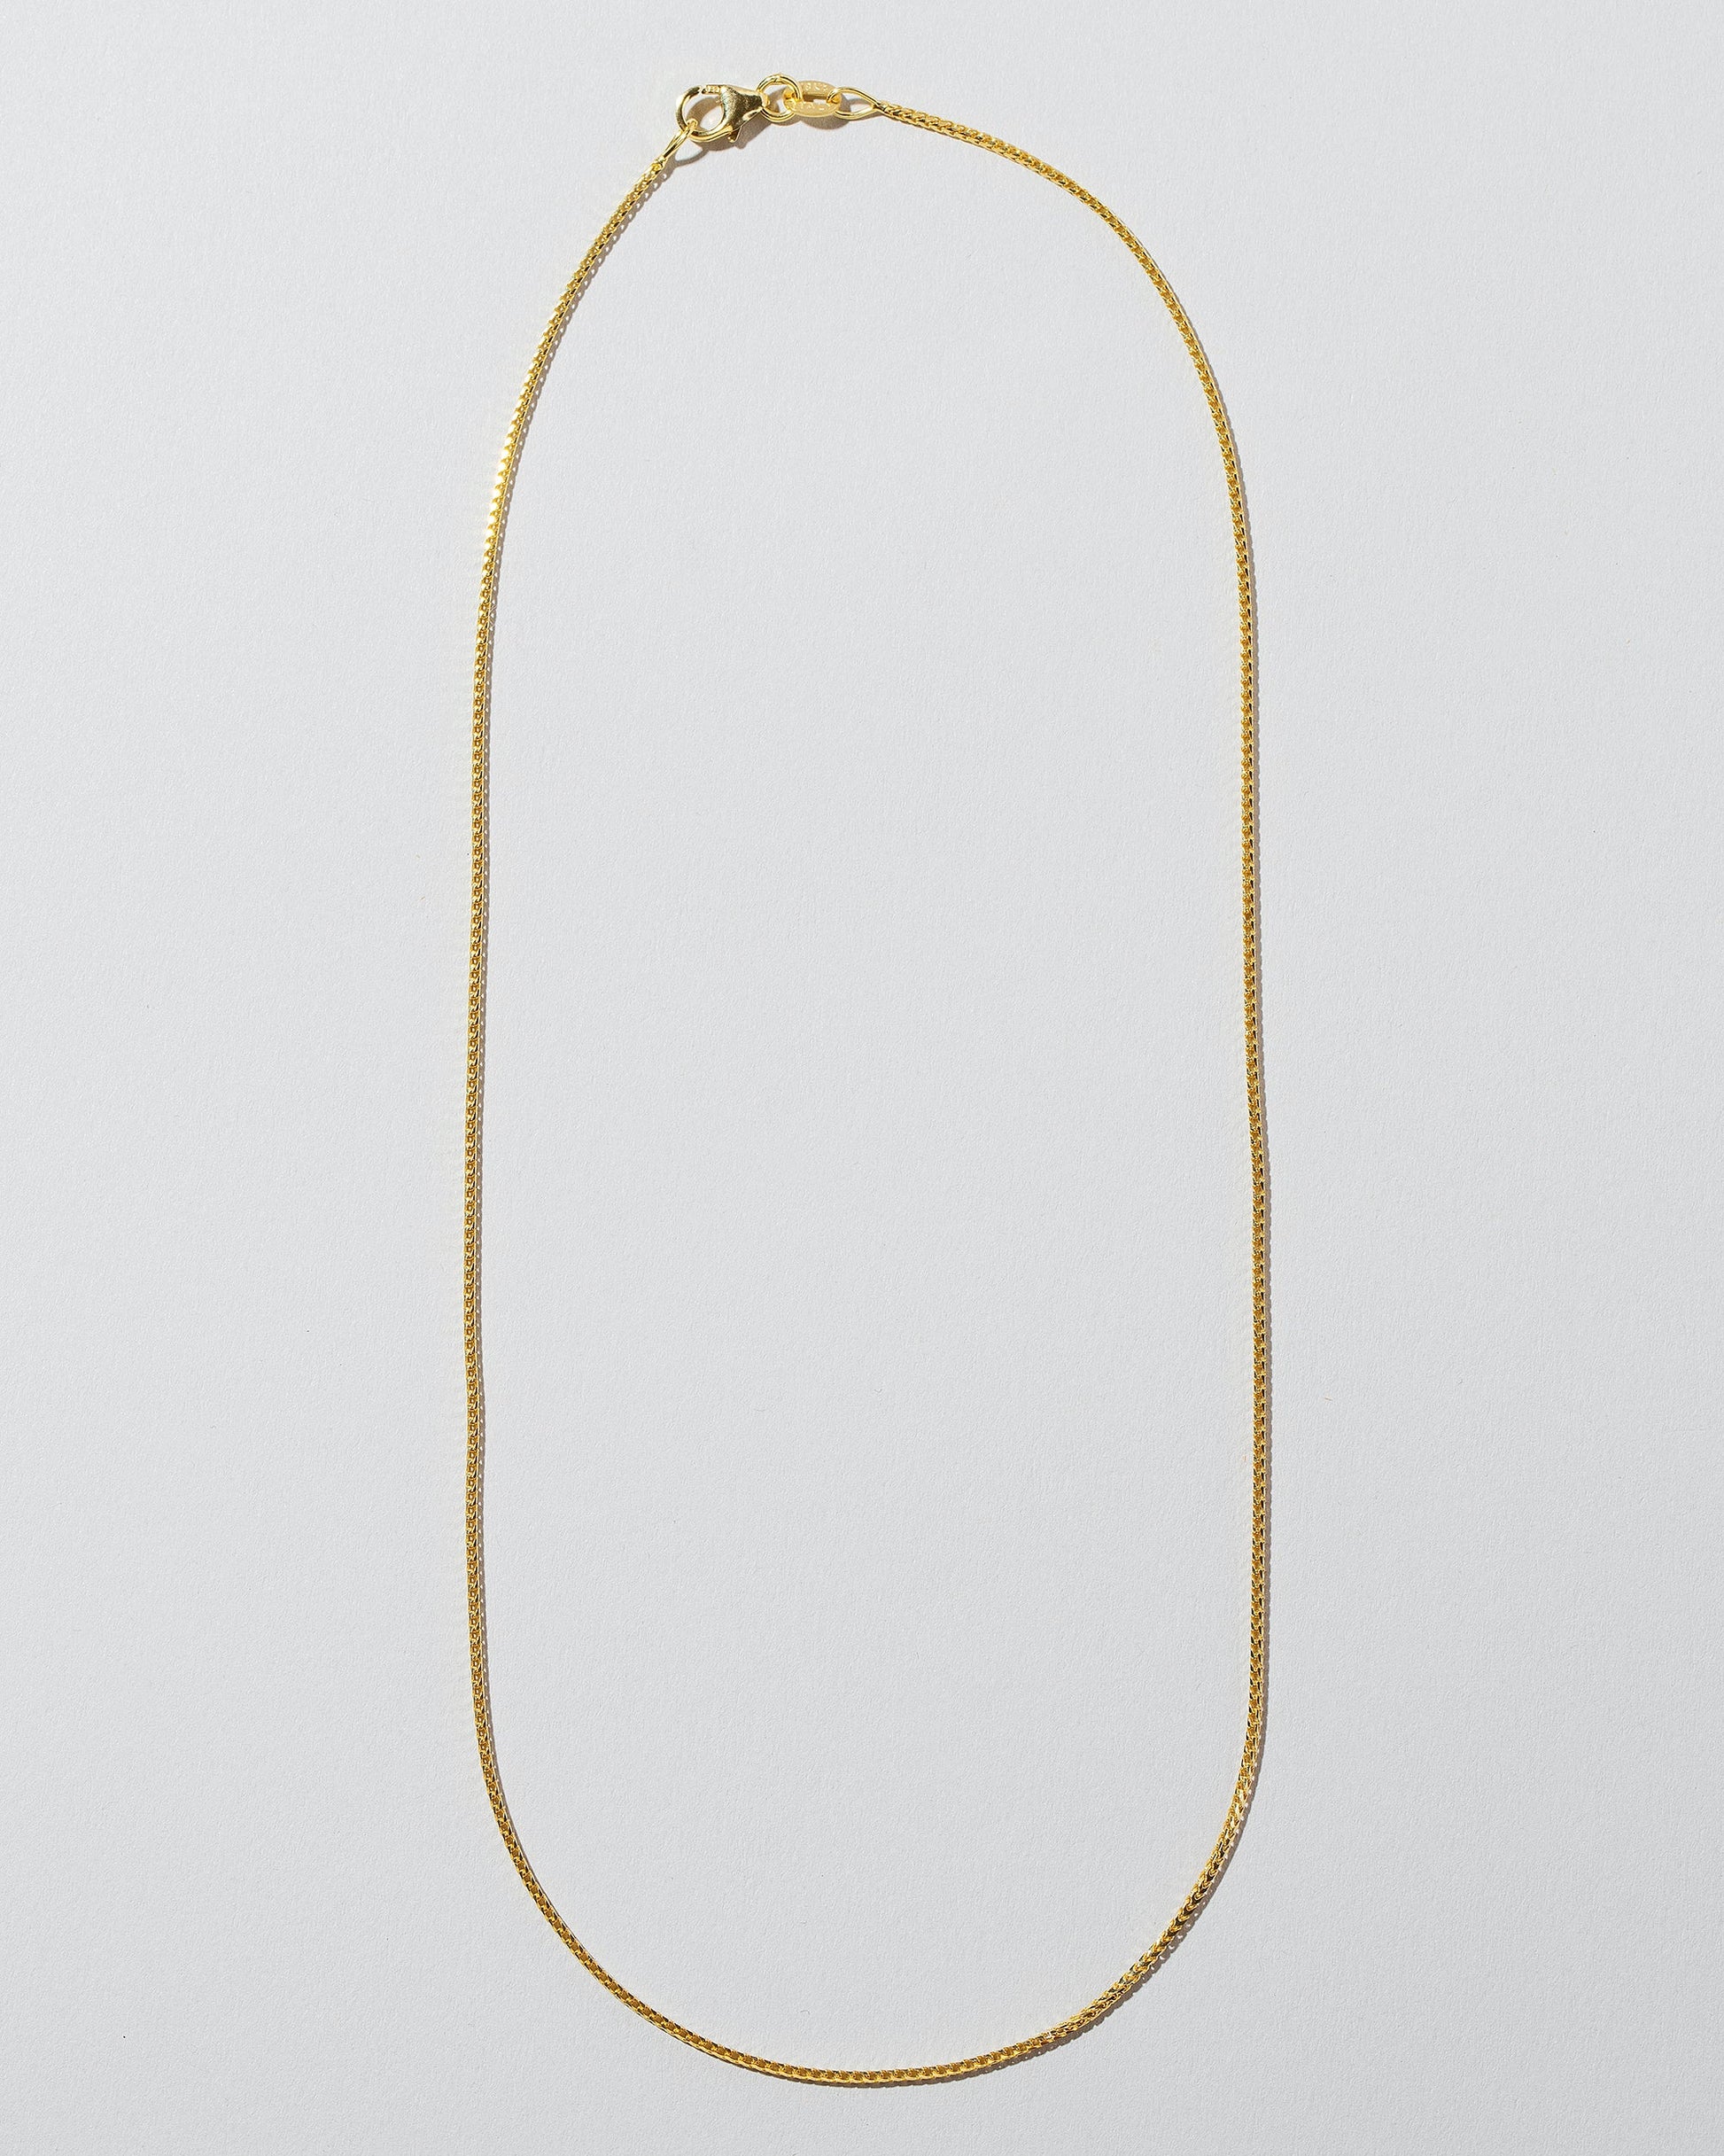 Gold 18" 1.5mm Ritual Chain Necklace on light color background.